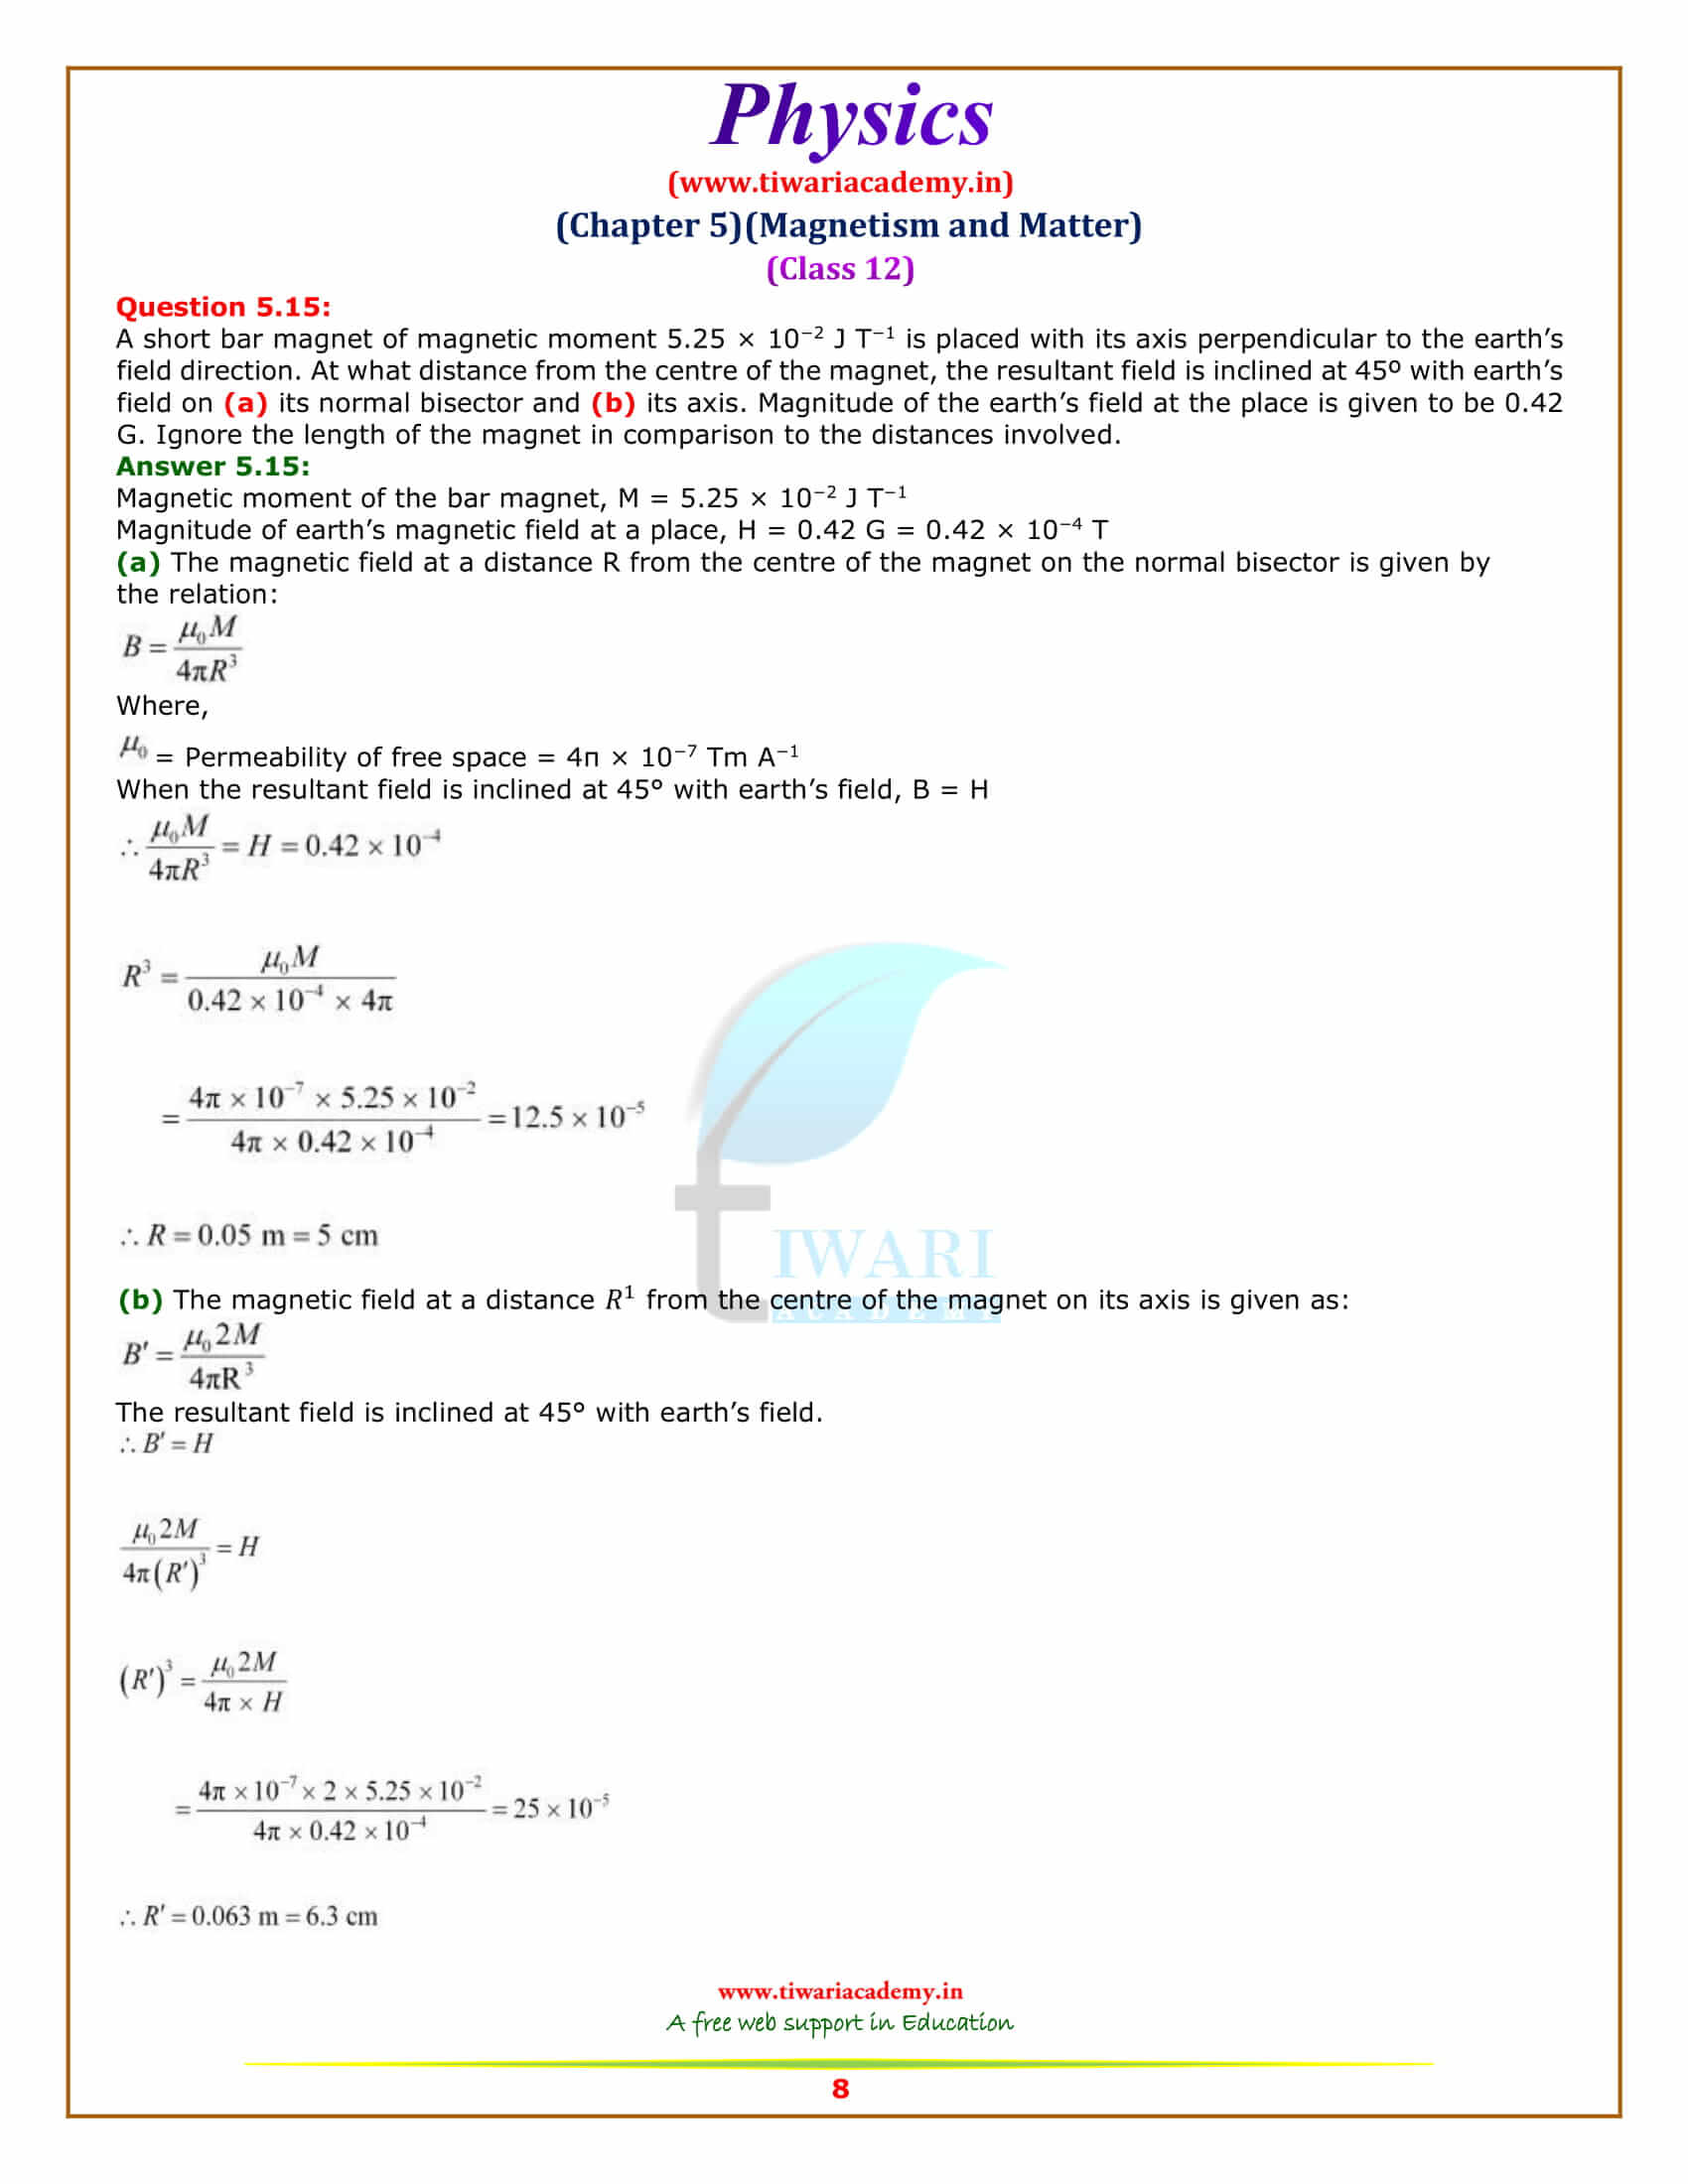 NCERT Solutions for Class 12 Physics Chapter 5 for 2018-19